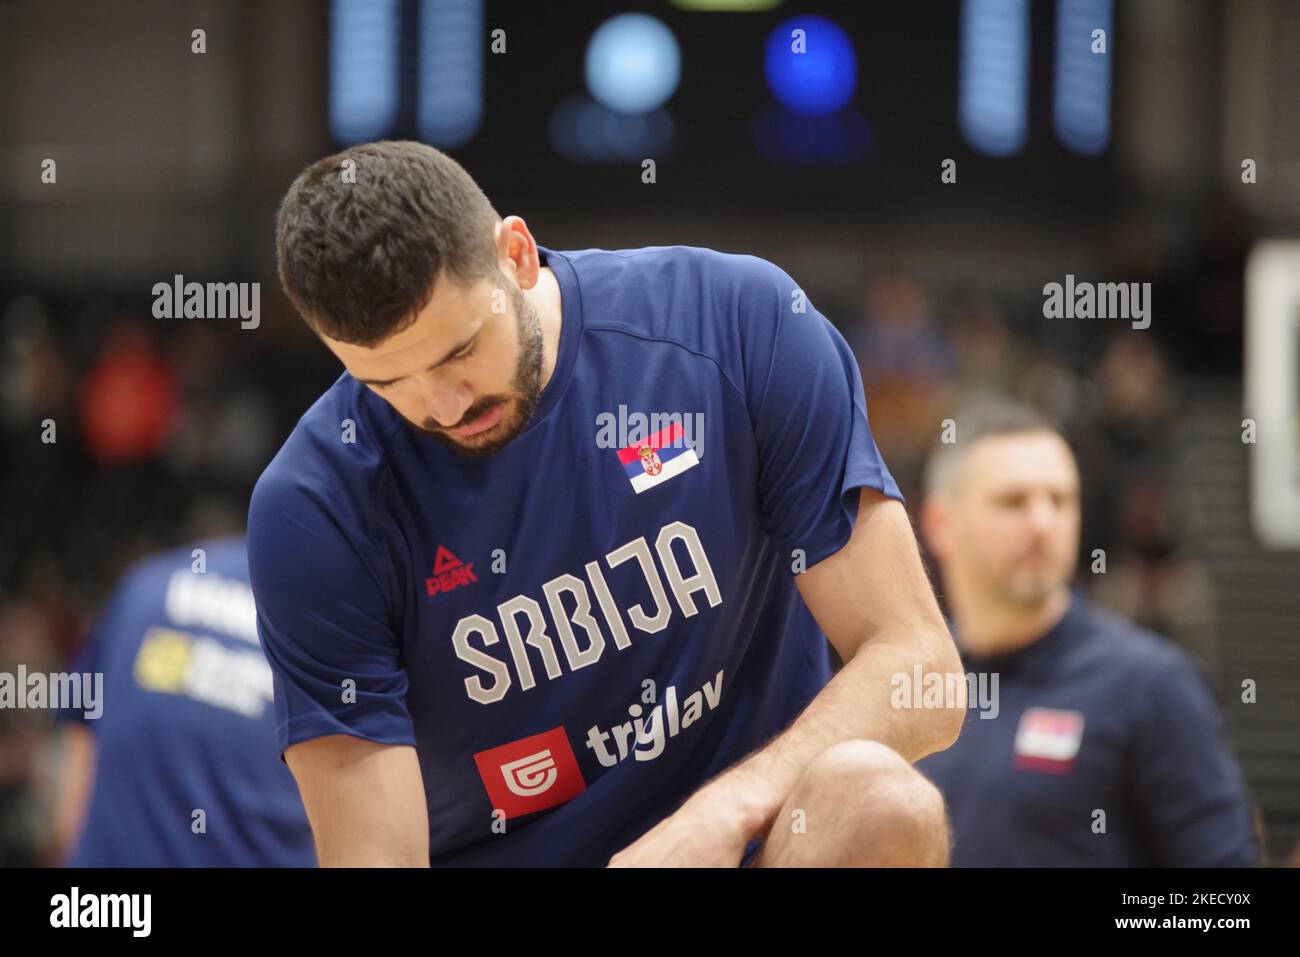 Newcastle upon Tyne, England, 11 November 2022. Marko Jagodic-Kuridza warming up for Serbia against Great Britain in the FIBA Basketball World Cup 2023 Qualifiers at the Vertu Motors Arena. Credit: Colin Edwards/Alamy Live News Stock Photo